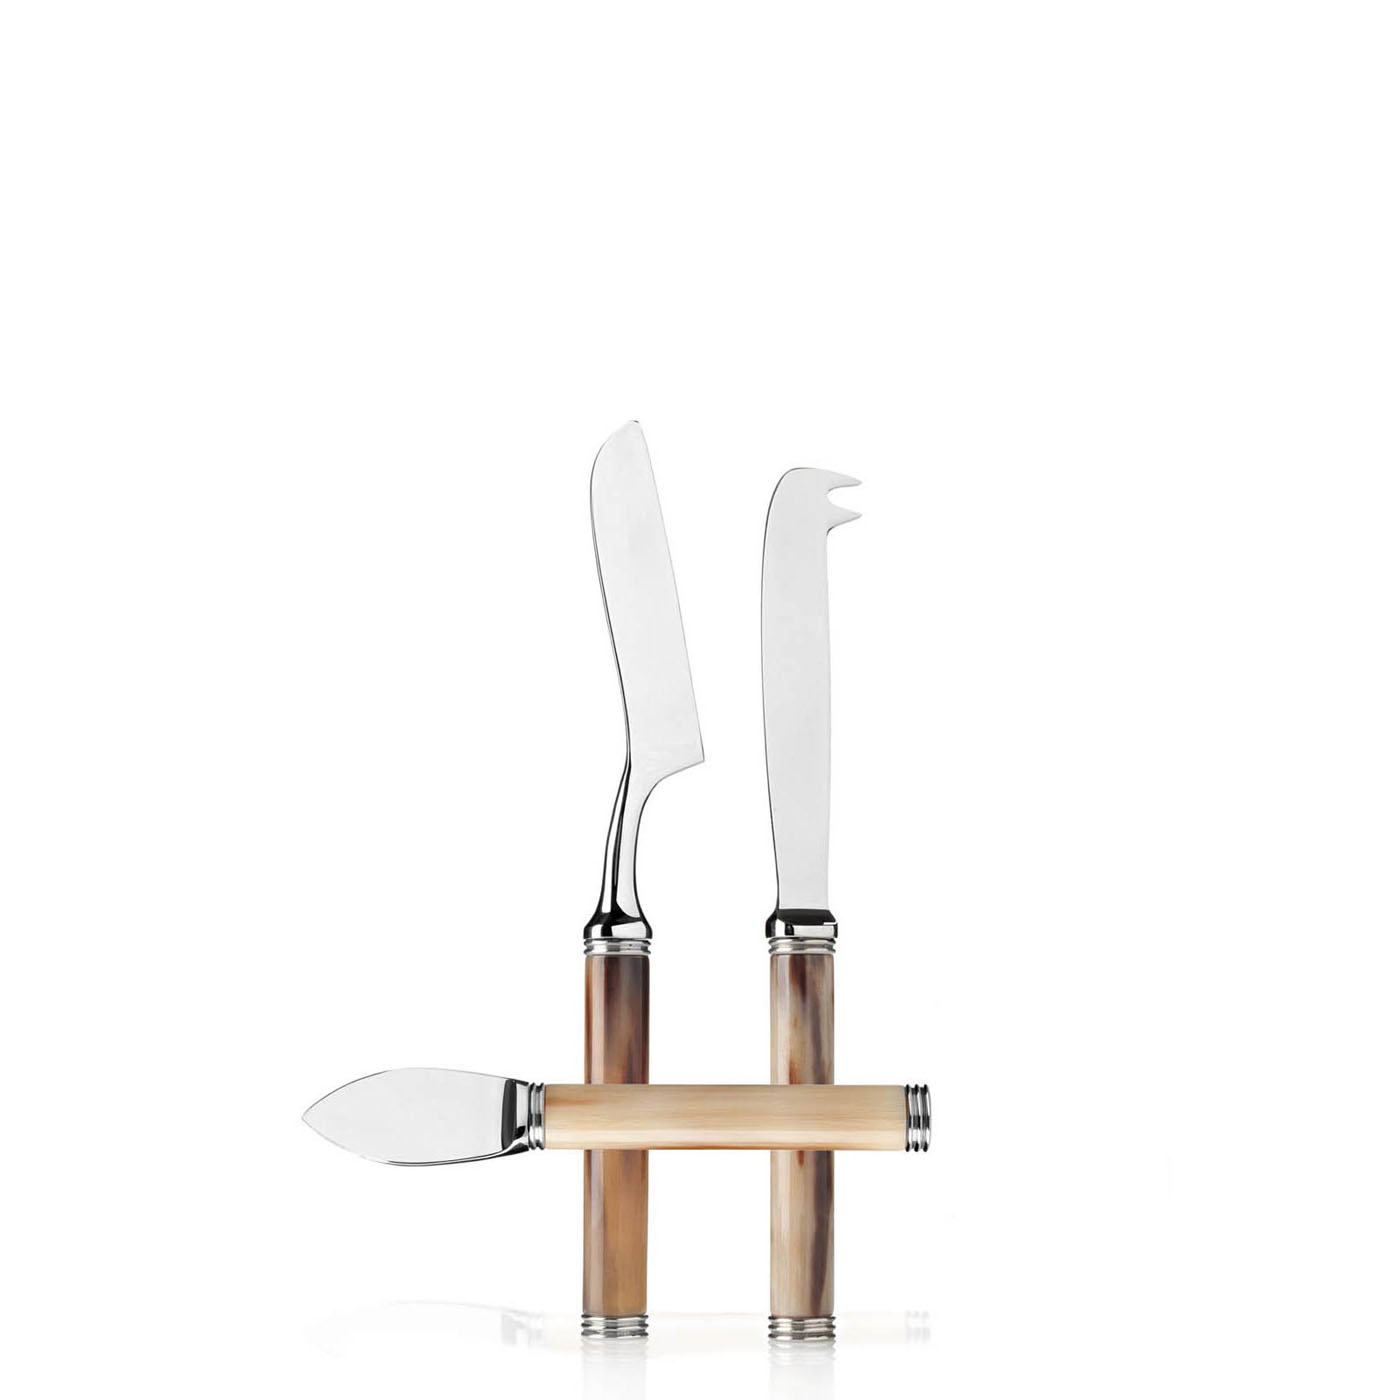 Tableware - Pule set of cheese knives in horn and stainless steel - Arcahorn